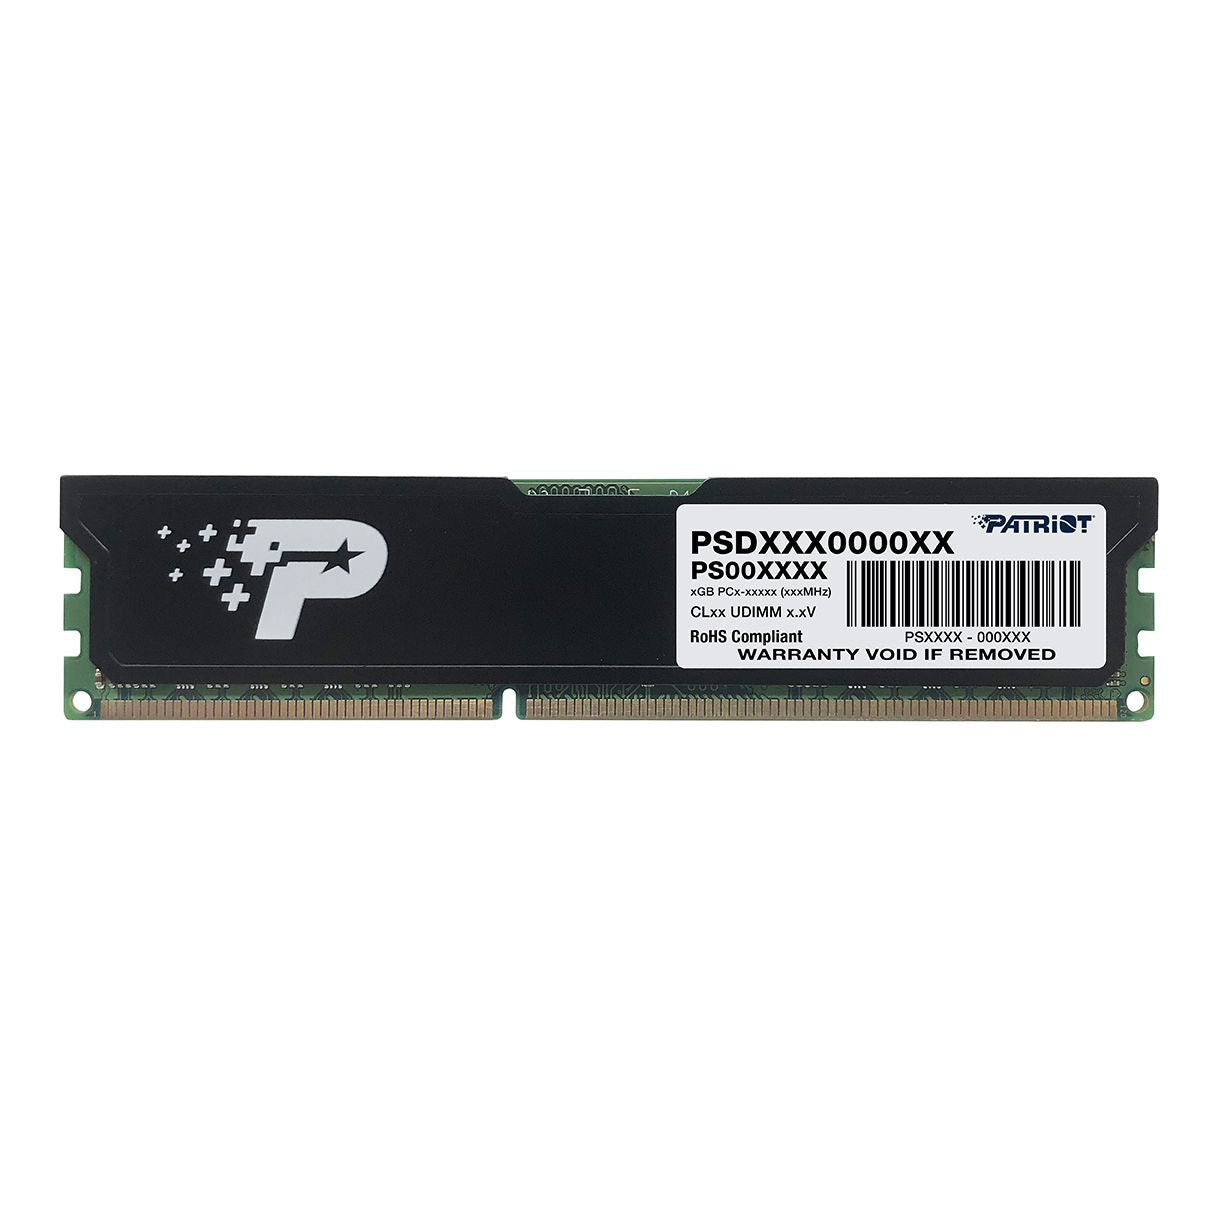 Patriot Signature Series - DDR3 UDIMM PC3-12800 (1600MHz) CL11_Single Module with Heatshield